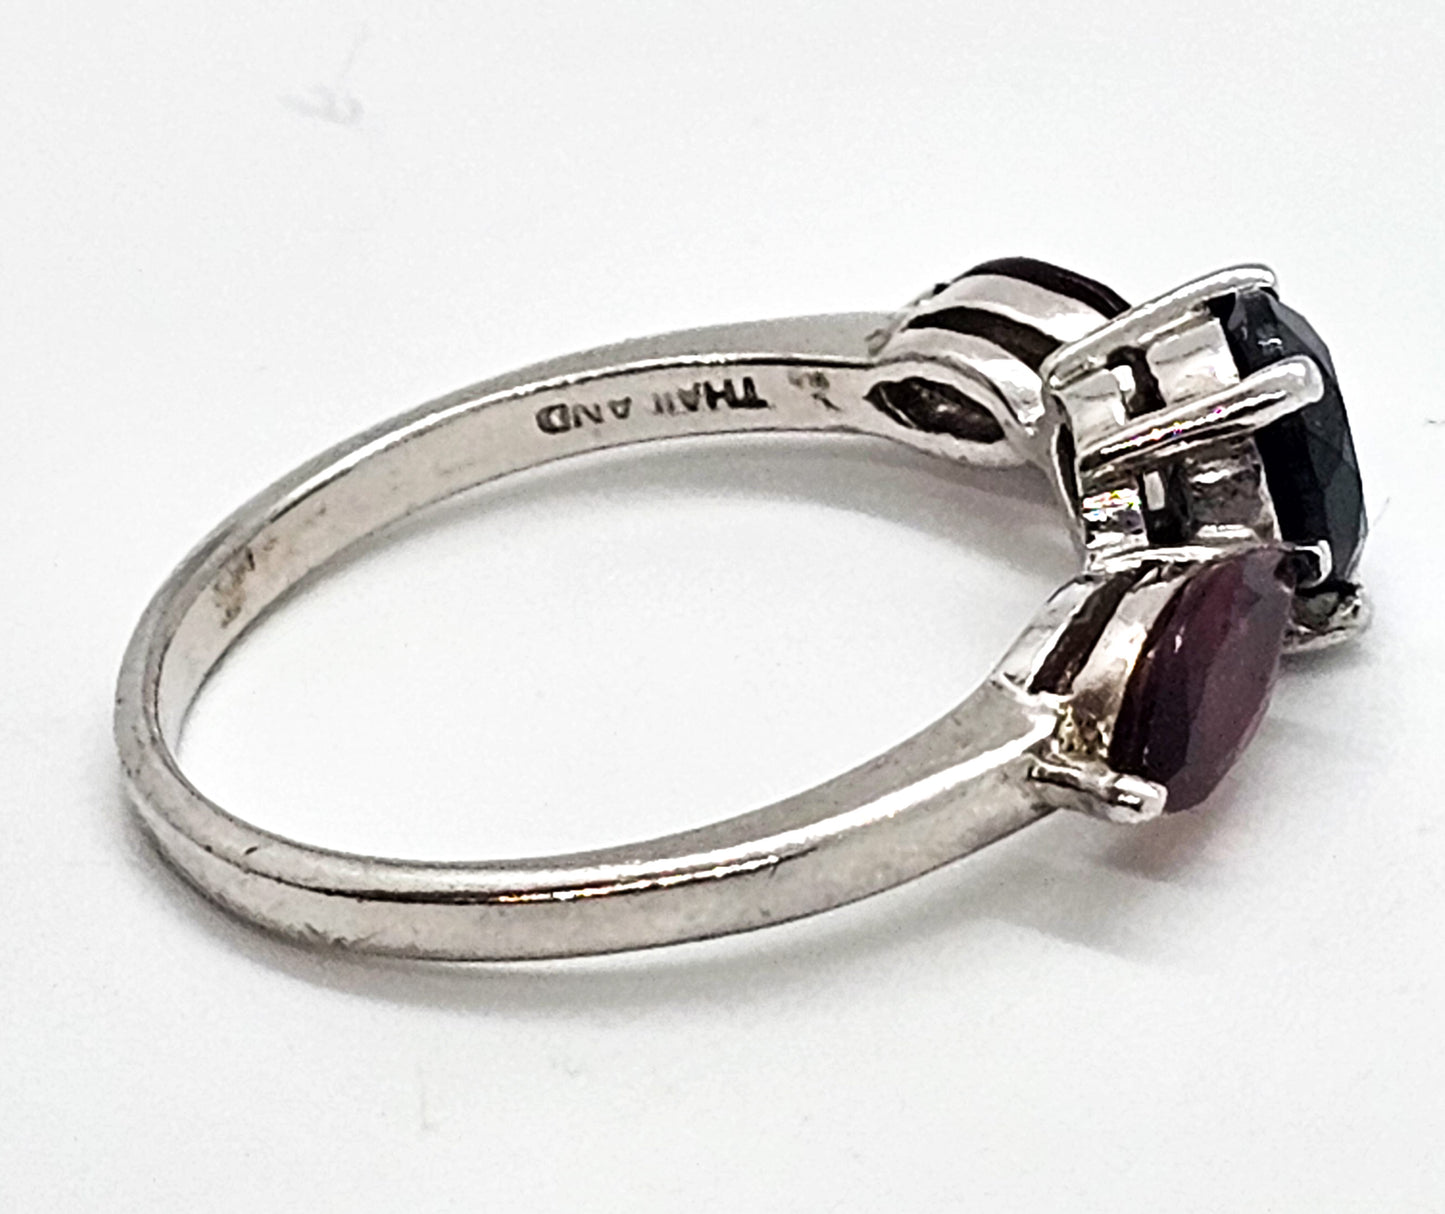 J&T Iolite and garnet gemstone bow sterling silver ring band size 10